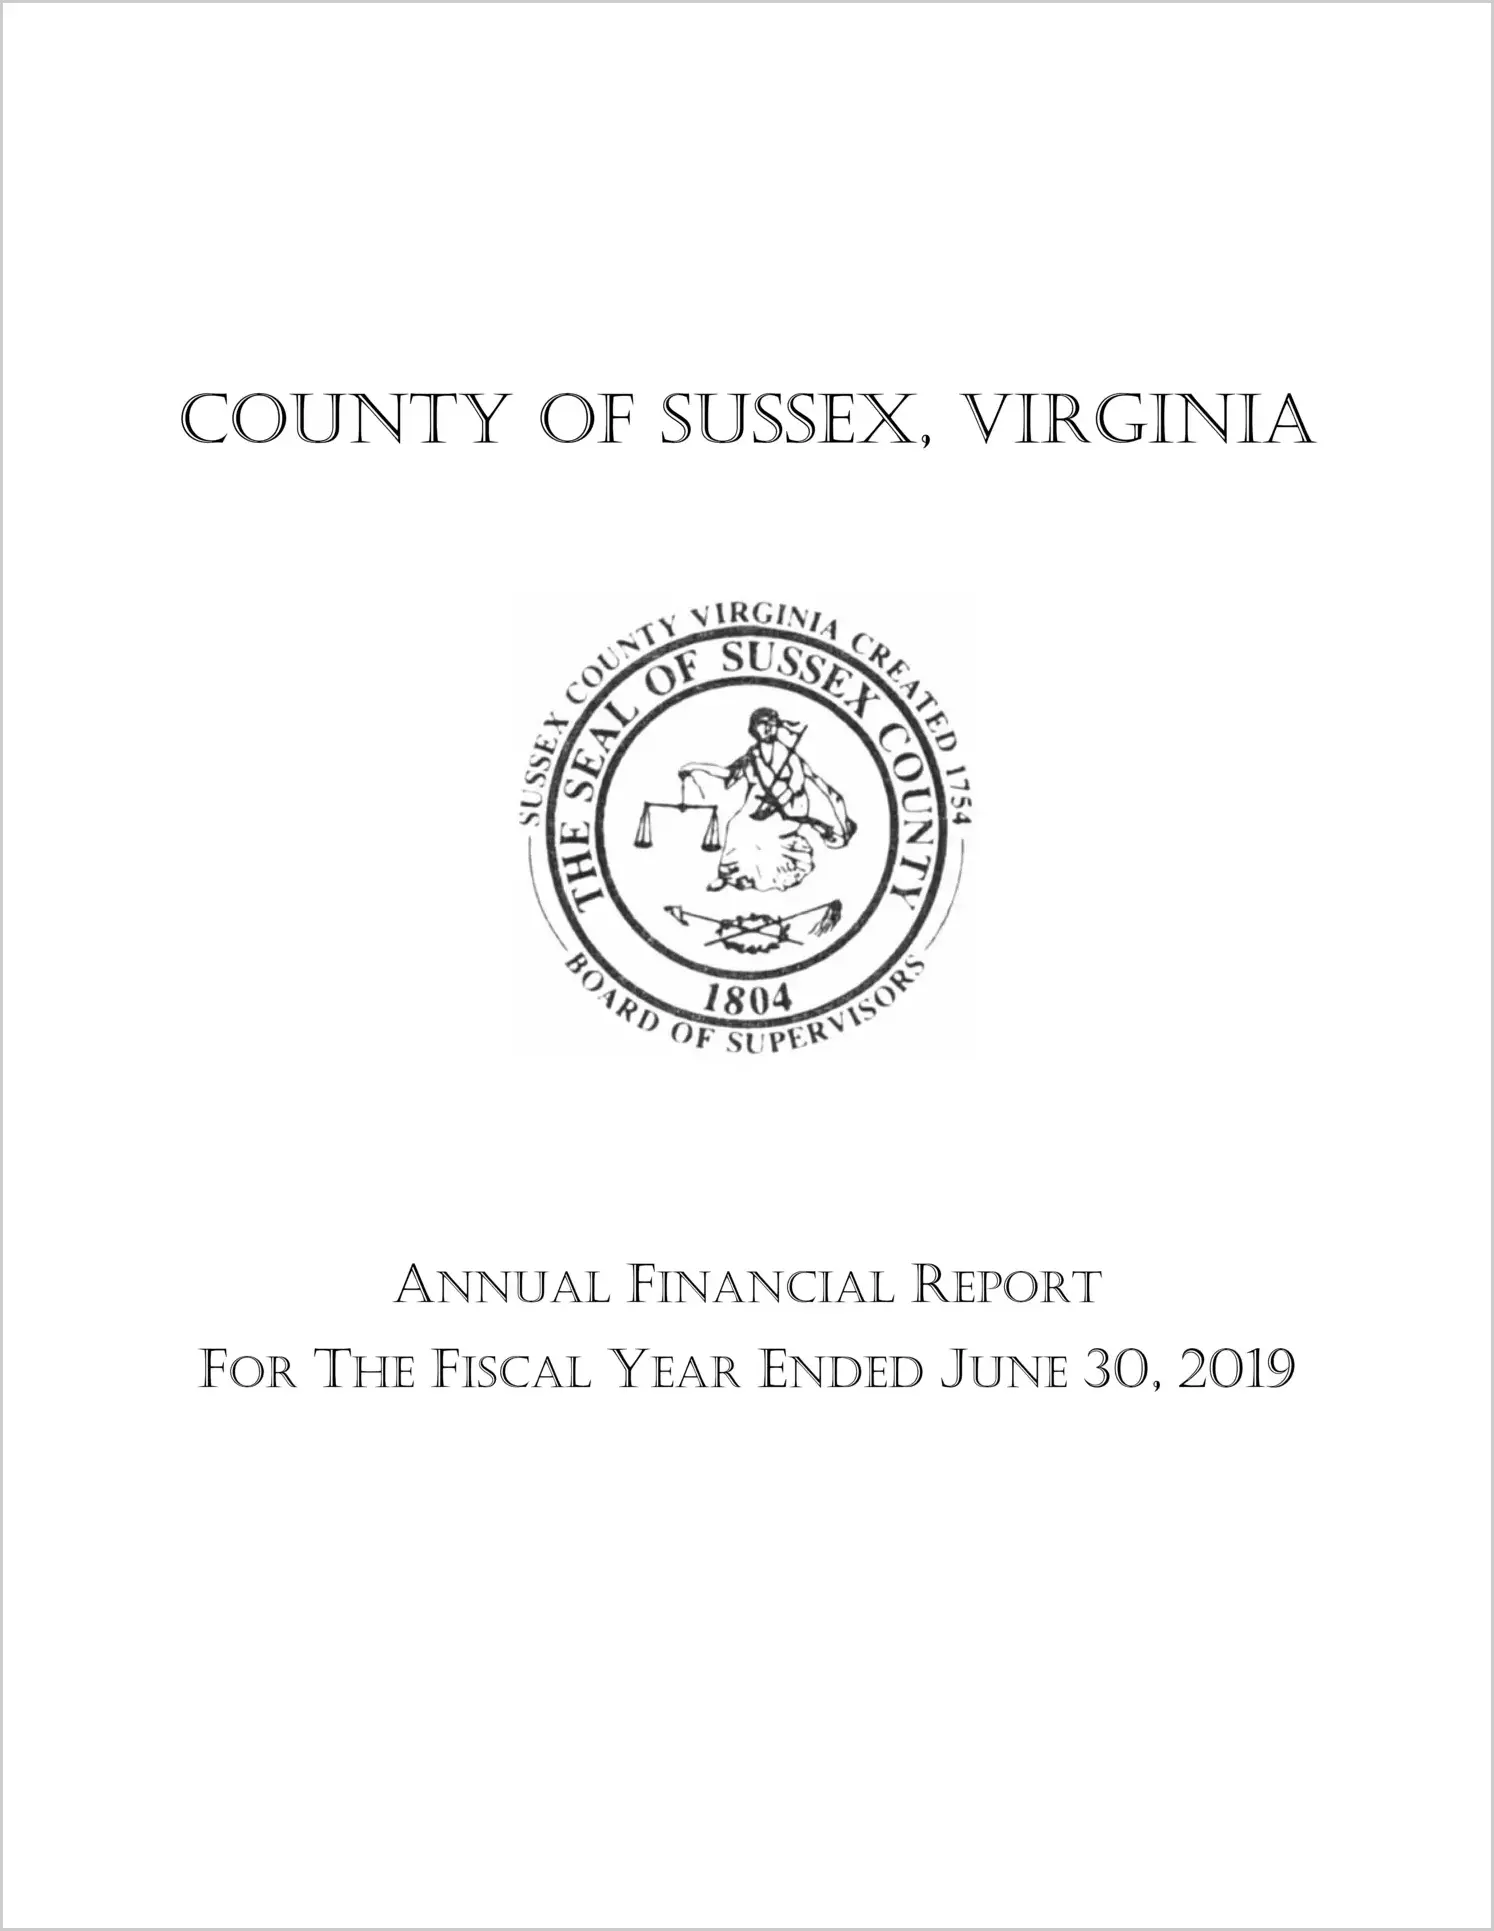 2019 Annual Financial Report for County of Sussex